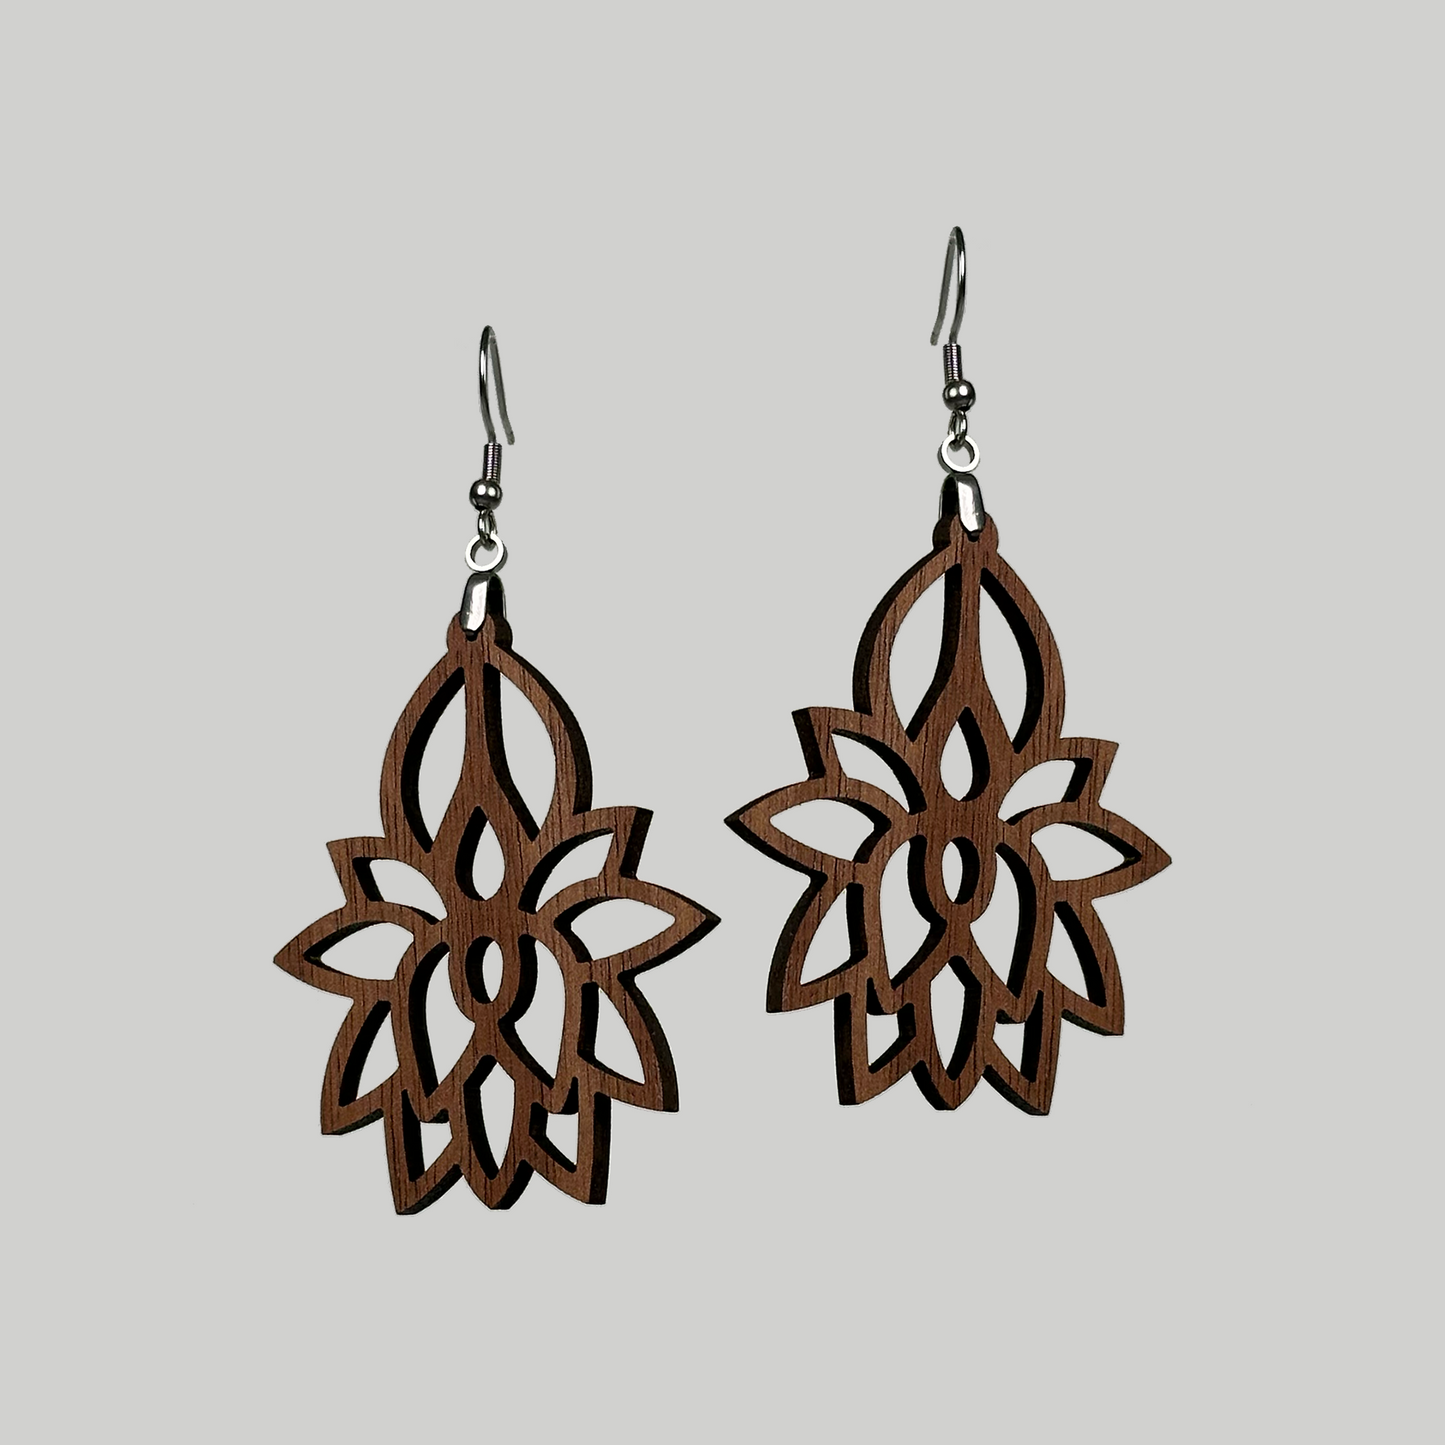 Lotus Earrings: Delicate and serene, these earrings feature lotus-inspired designs for a touch of natural elegance.